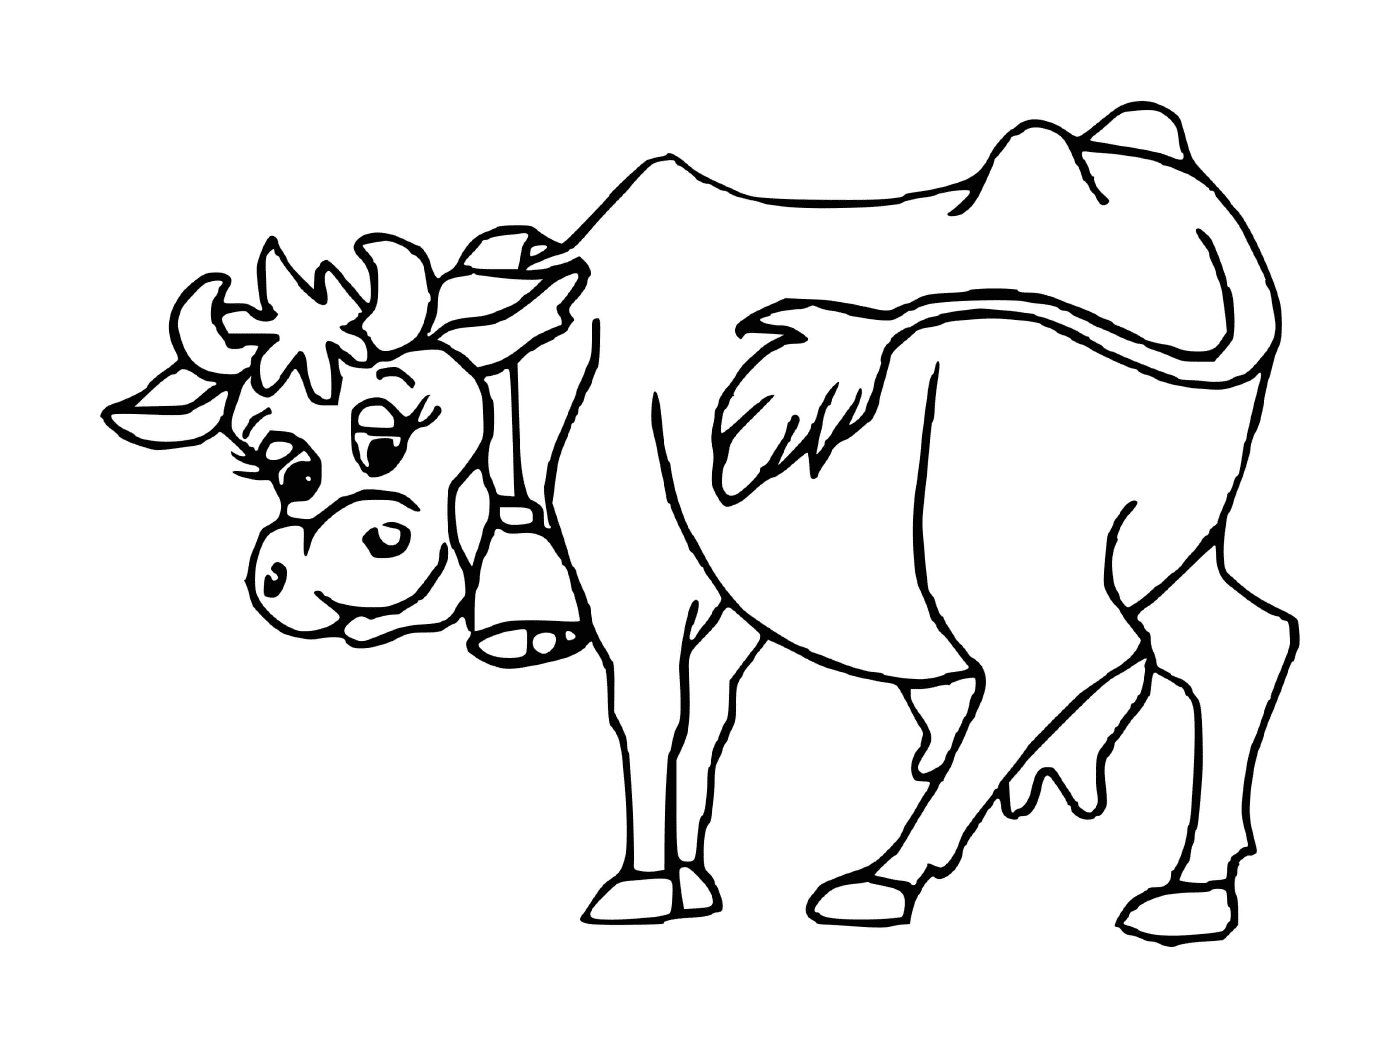  Cow with bell 